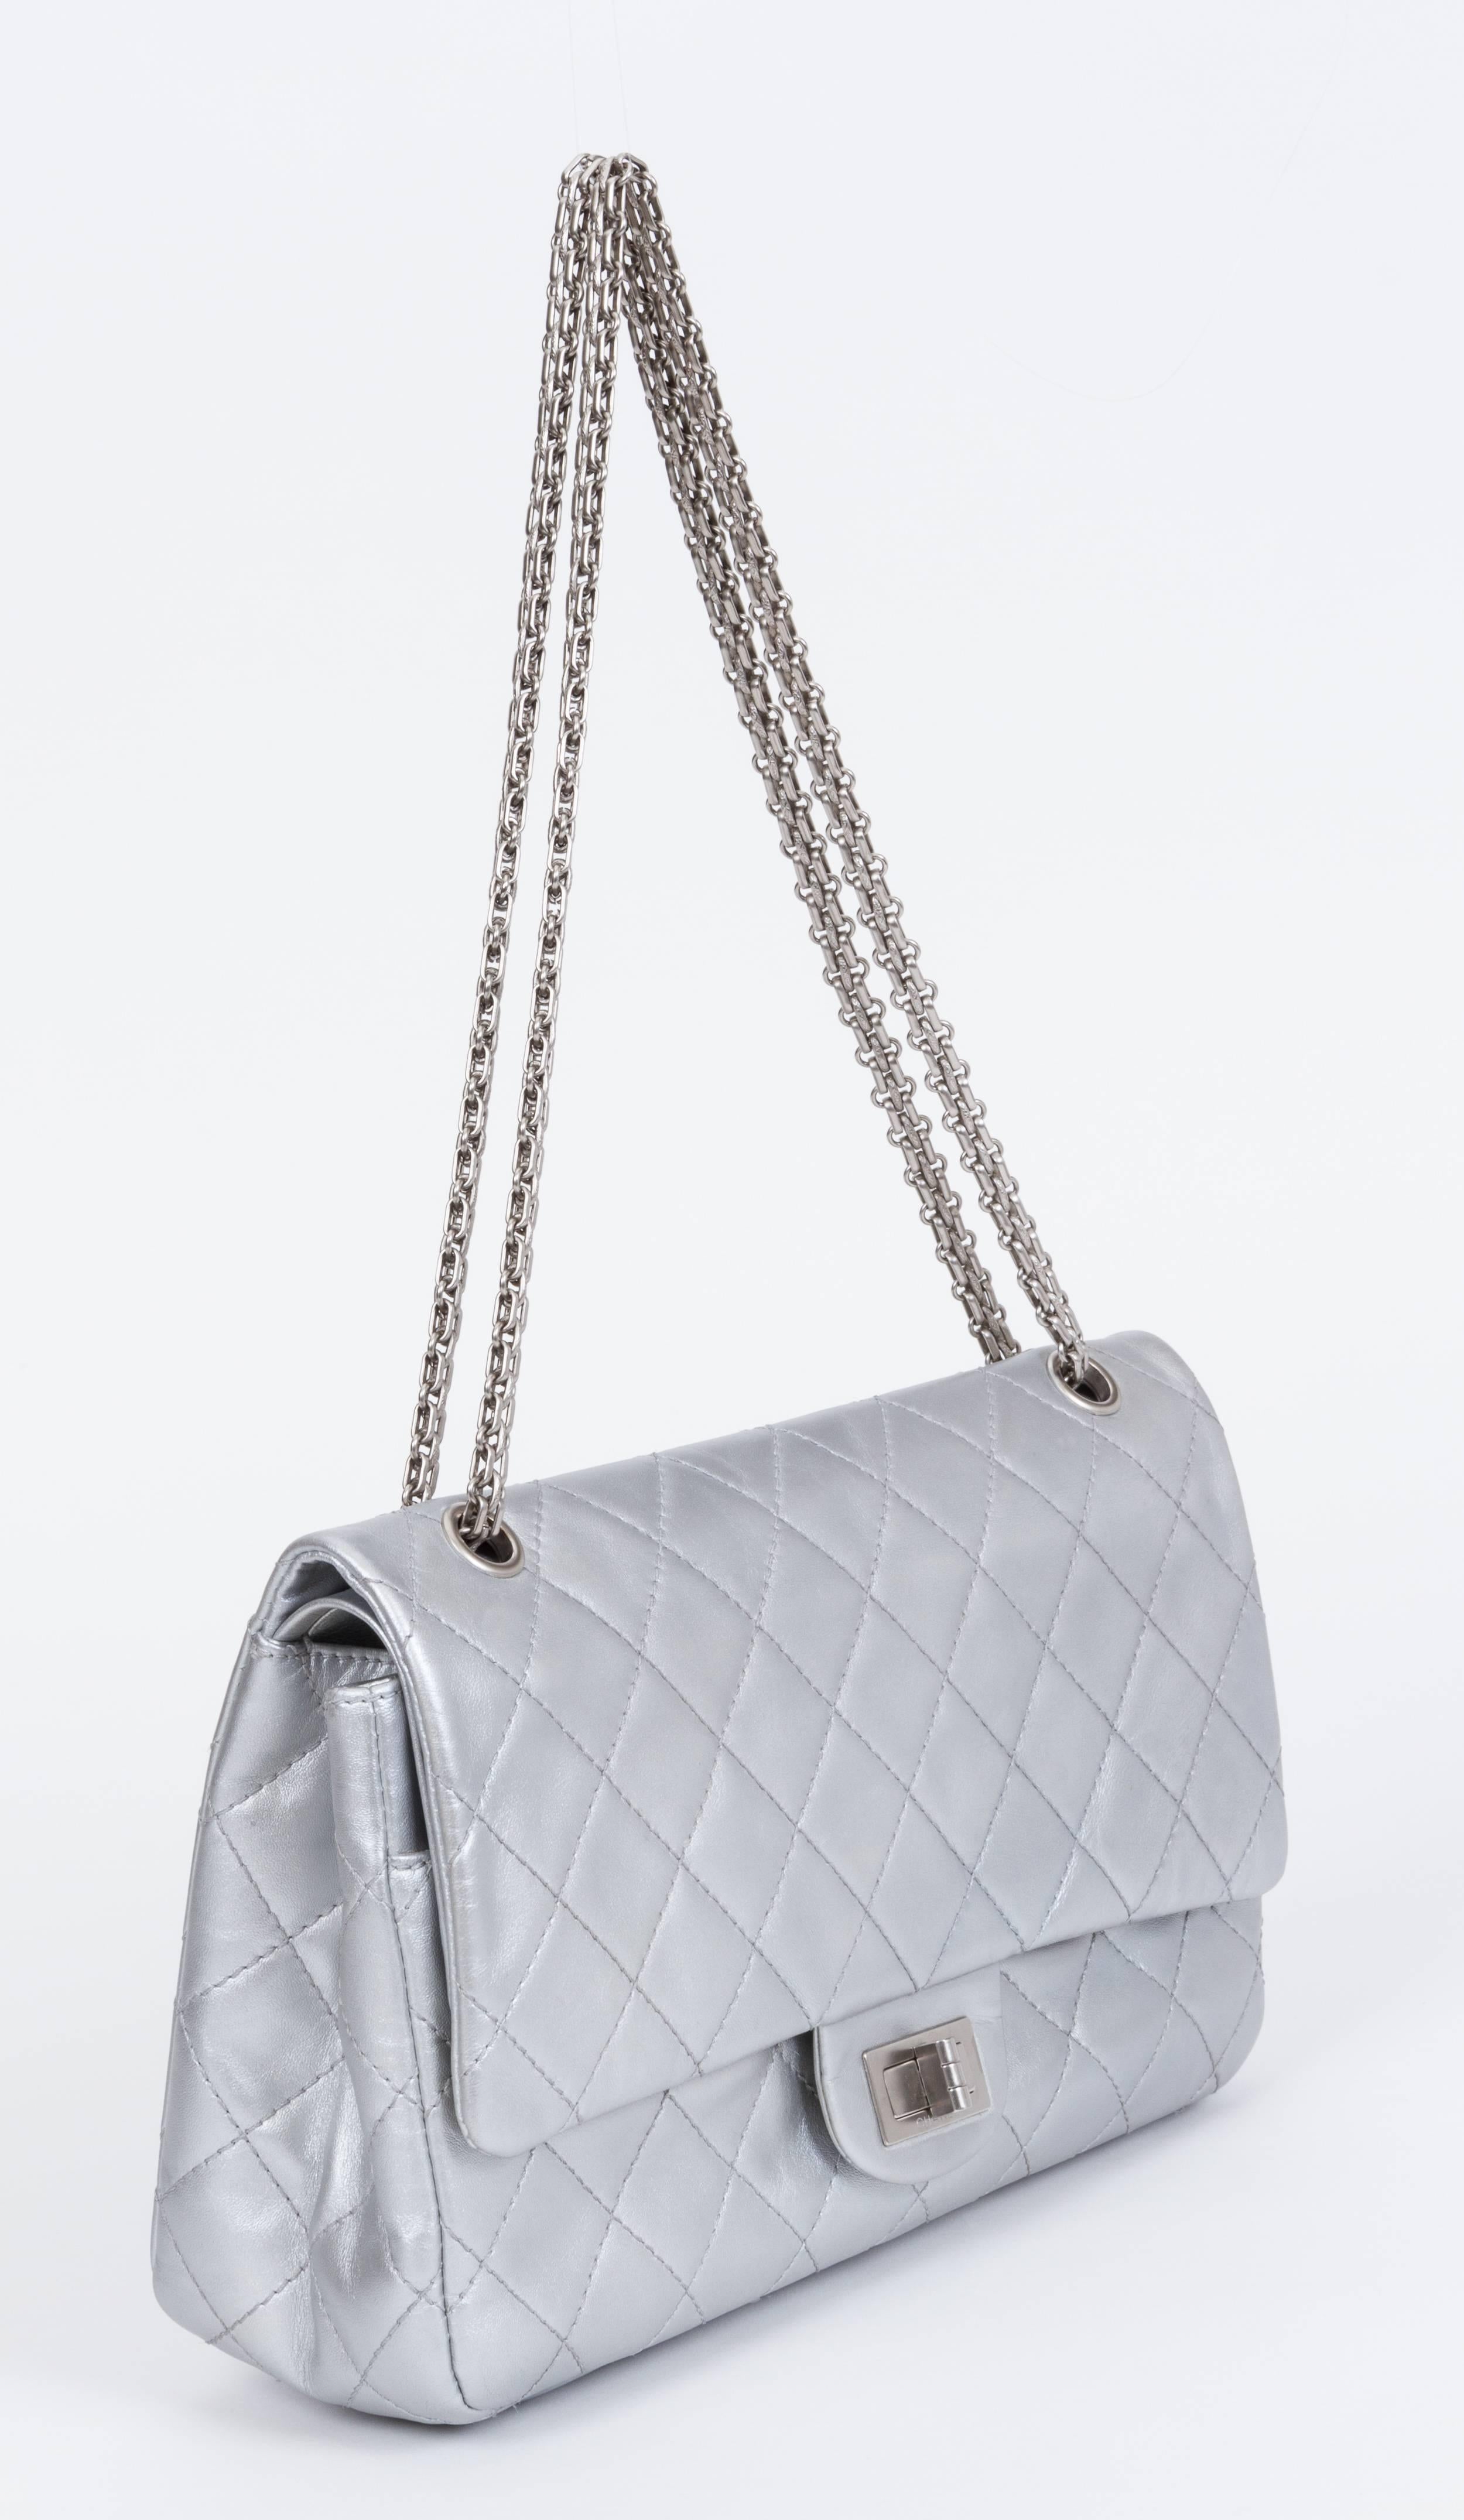 Chanel jumbo reissue silver double flap. Metallic silver leather and silver metal. Can be worn cross body. Shoulder drop 11